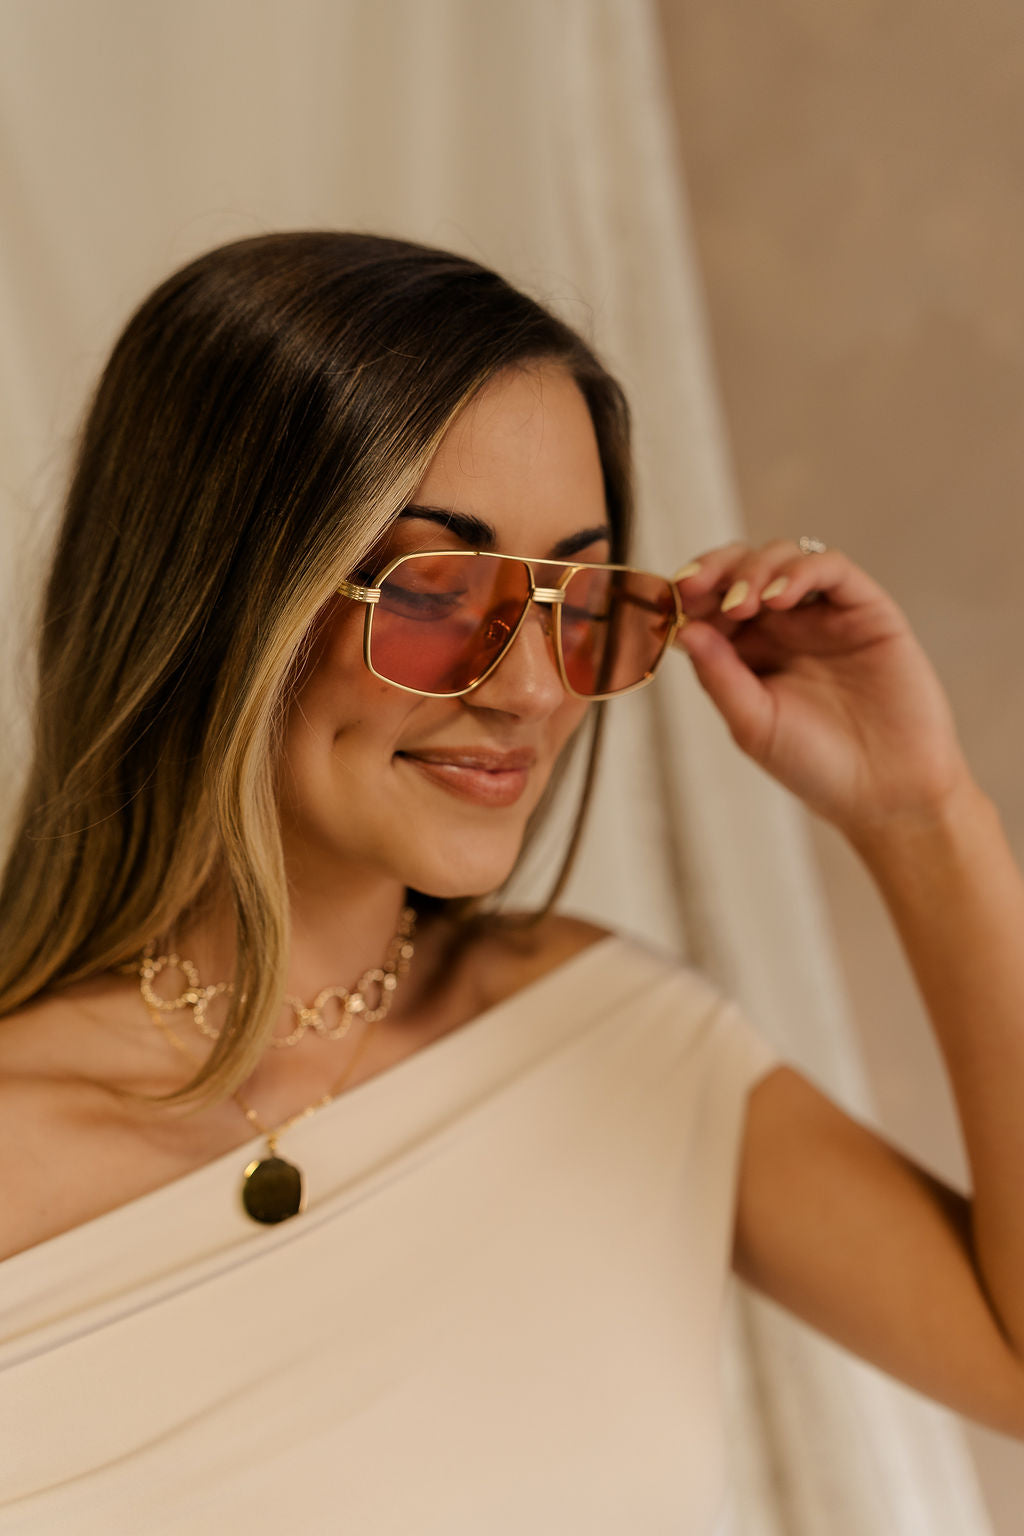 Upper body front view of female model. Model is wearing the The I-Sea: Bliss Sunglasses in Gold & Amber and a beige top.